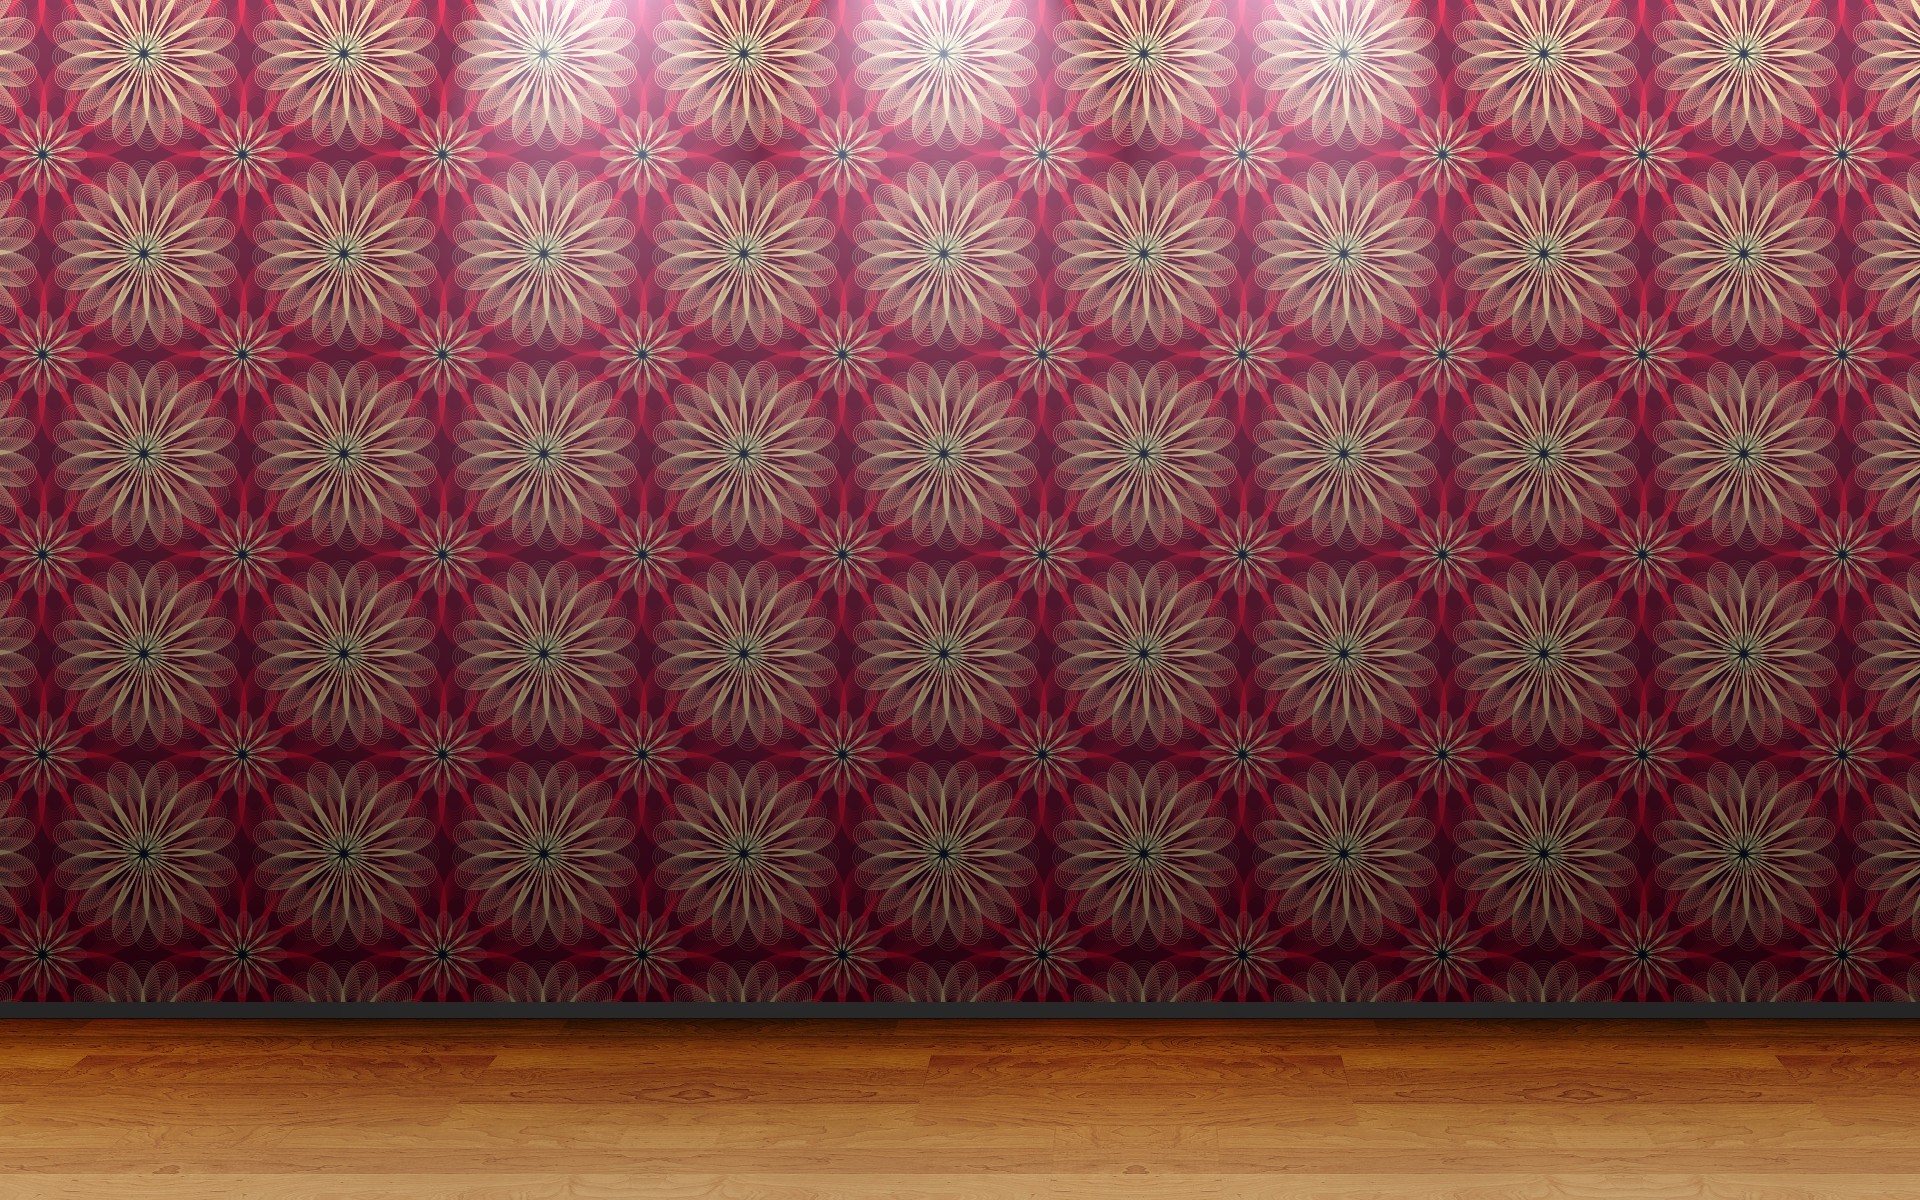 Floral Wall Pattern wallpapers Floral Wall Pattern stock photos